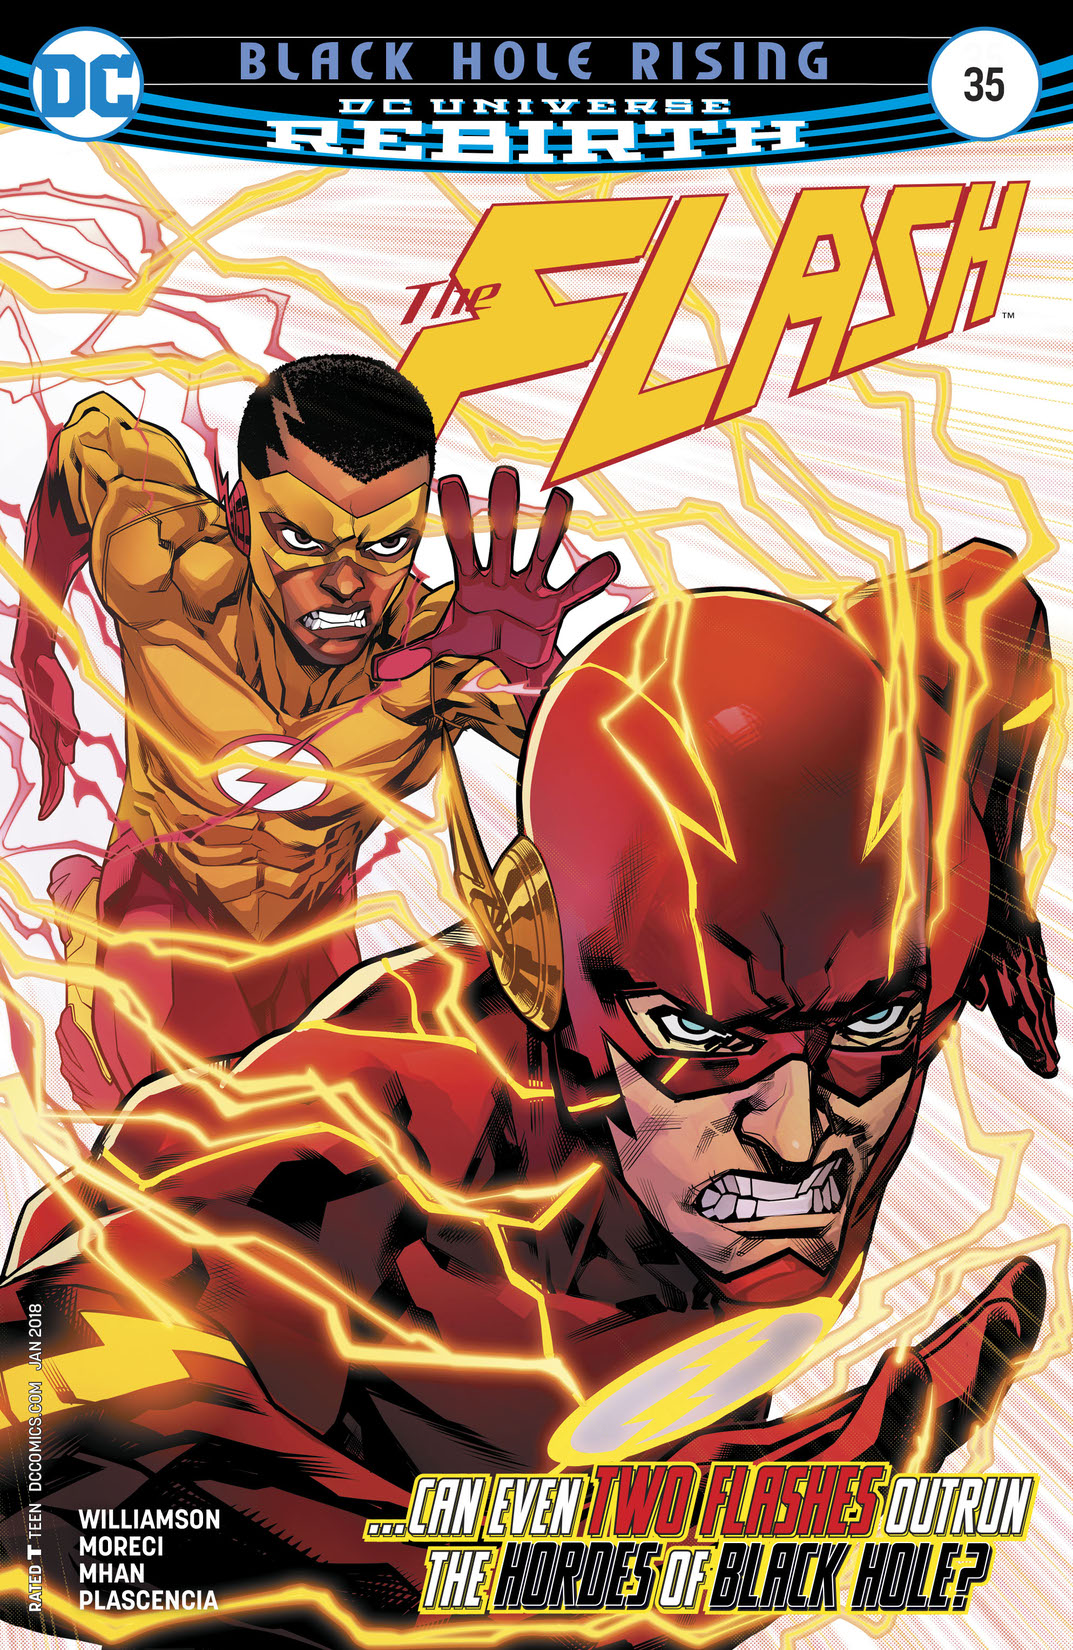 The Flash (2016-) #35 preview images